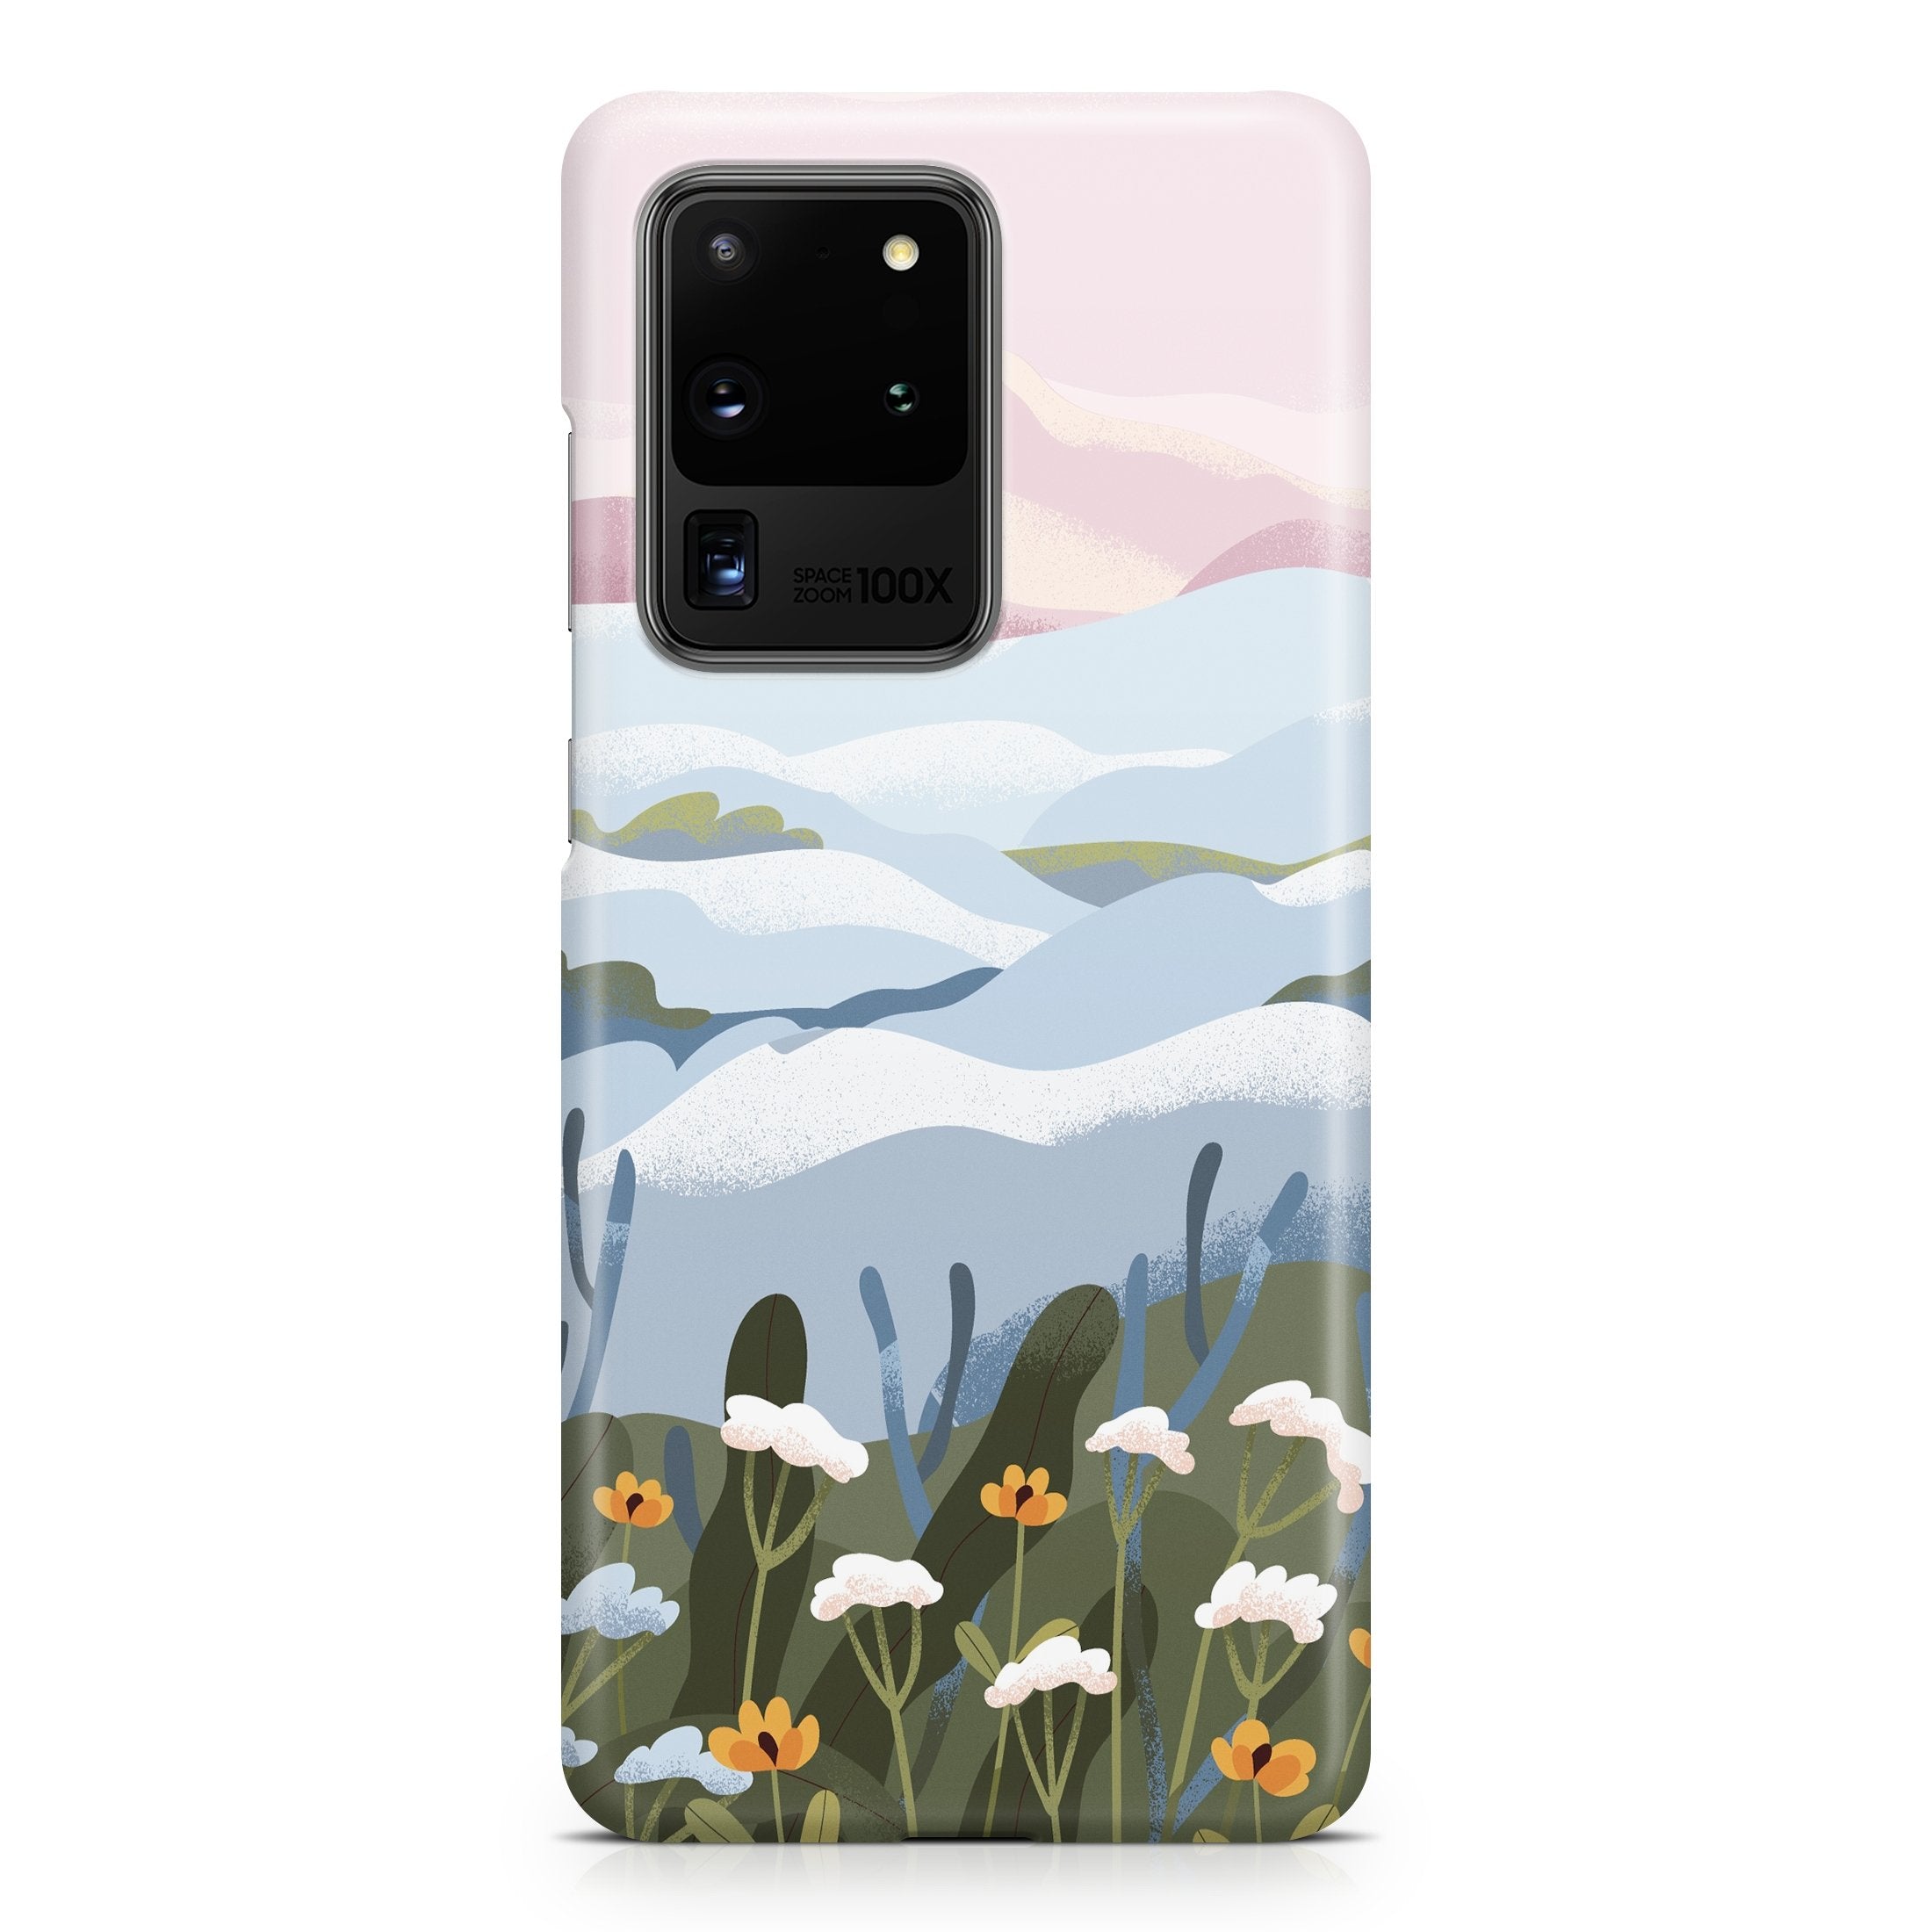 Watercolor Nature - Samsung phone case designs by CaseSwagger